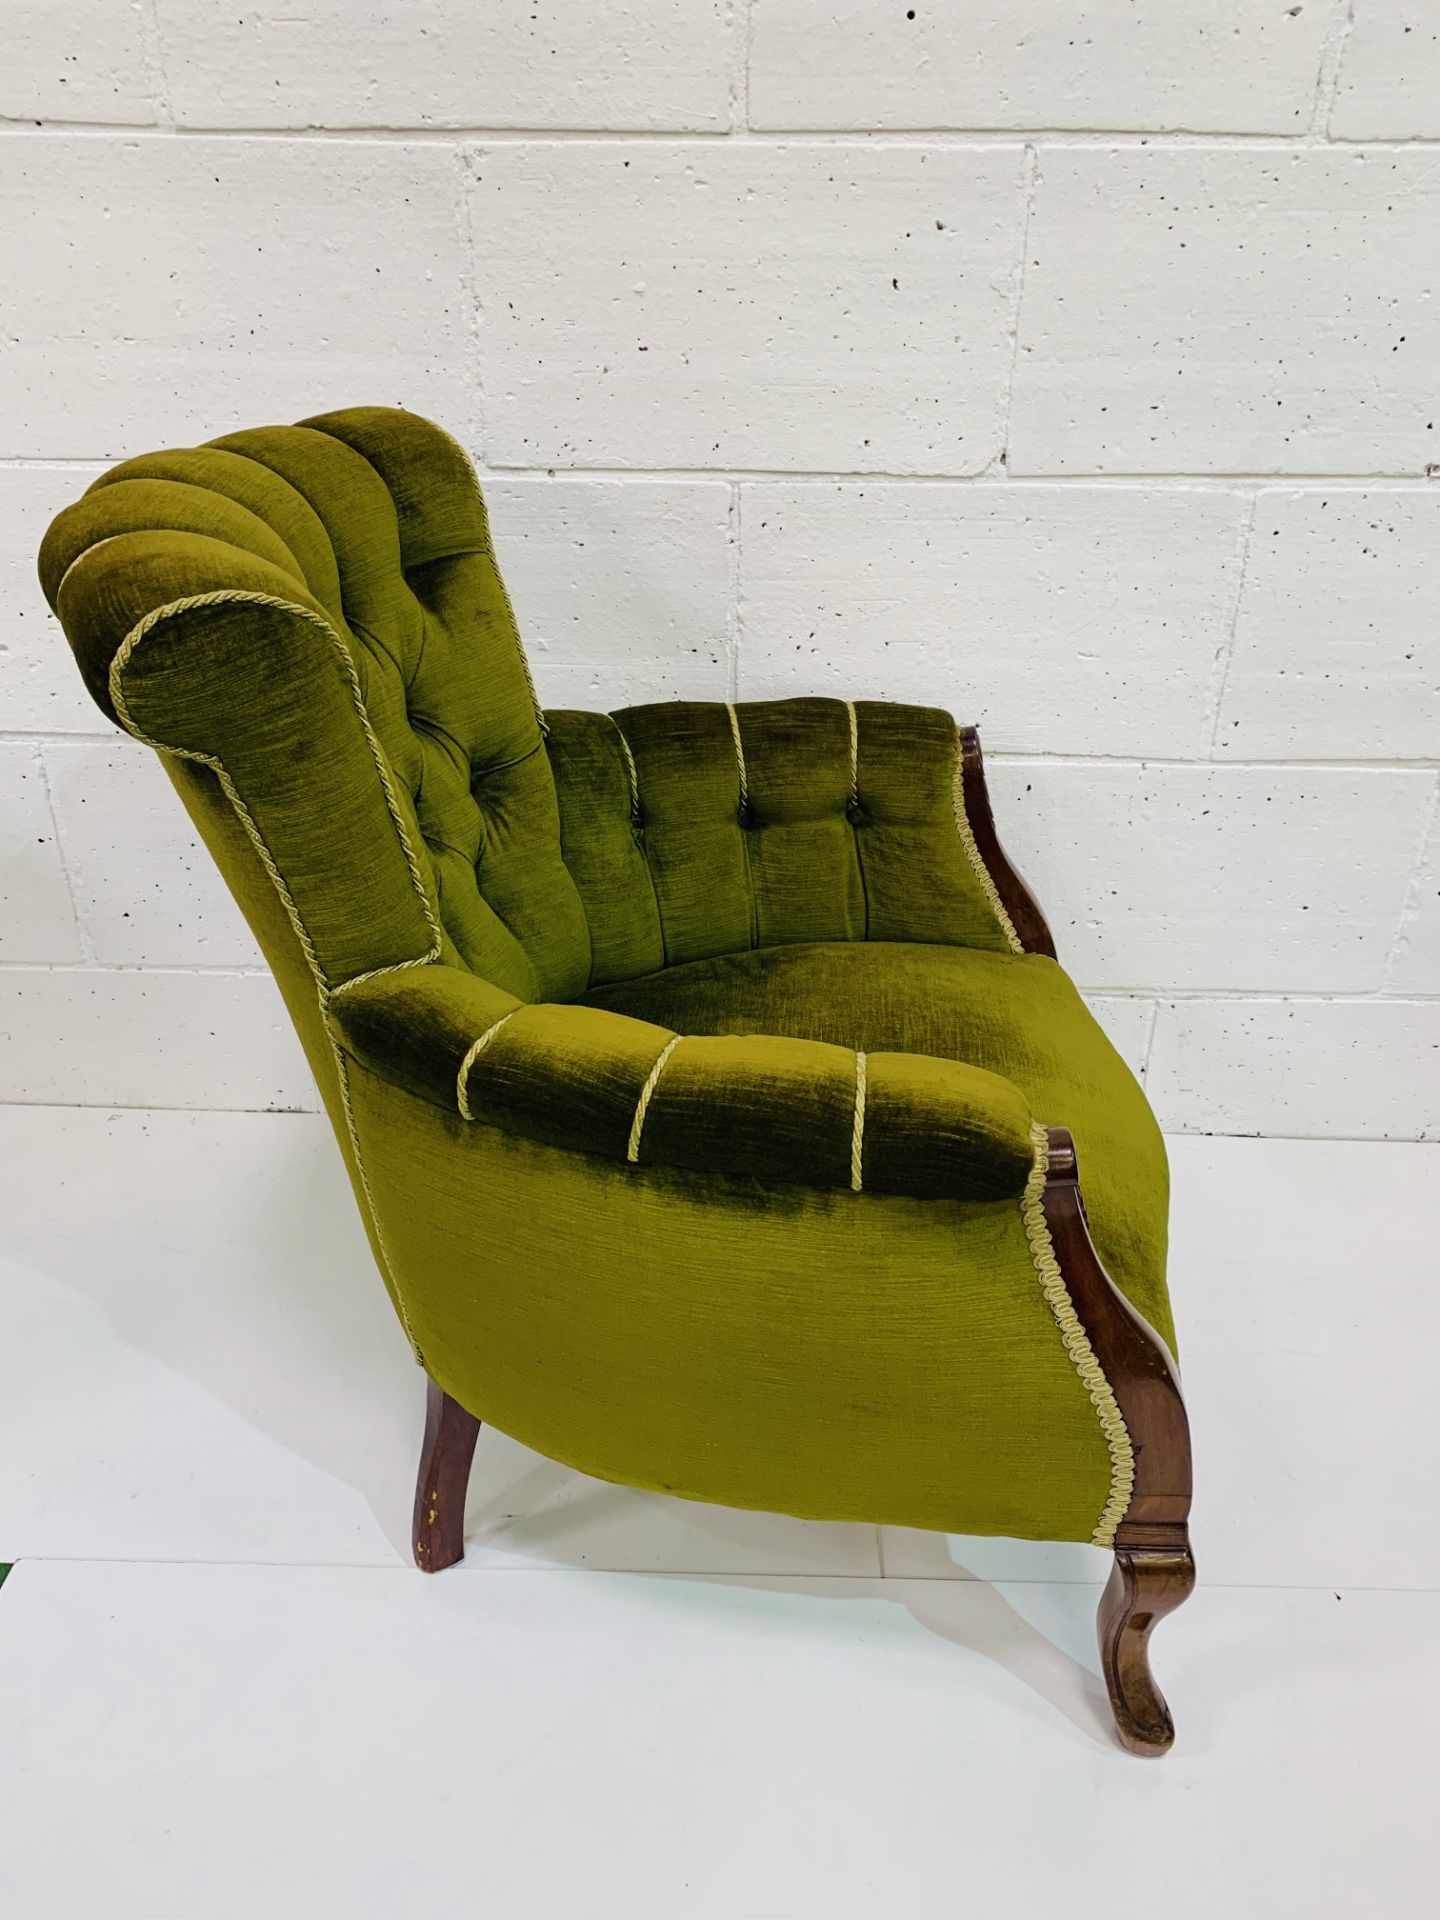 Drawing room chair upholstered in button back green upholstery. - Image 3 of 4